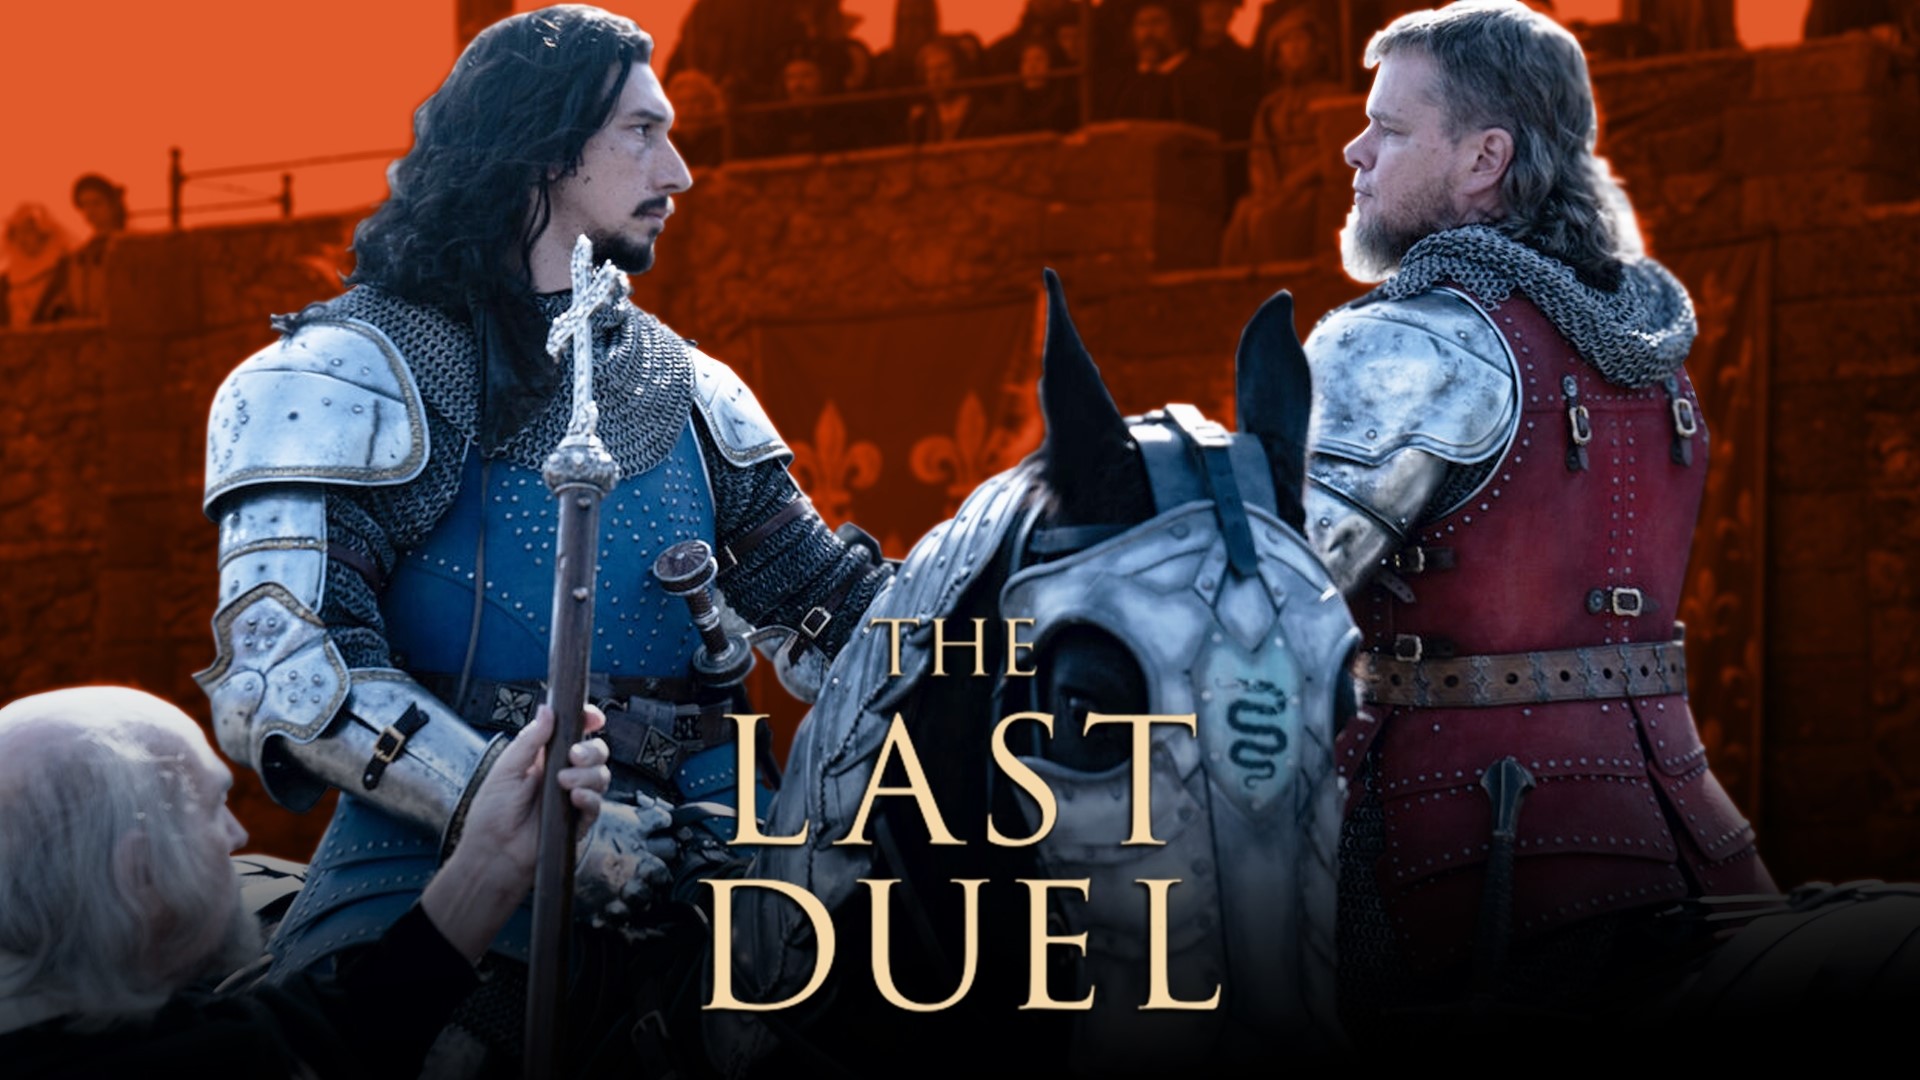 Review: Medieval and #MeToo clash in 'The Last Duel